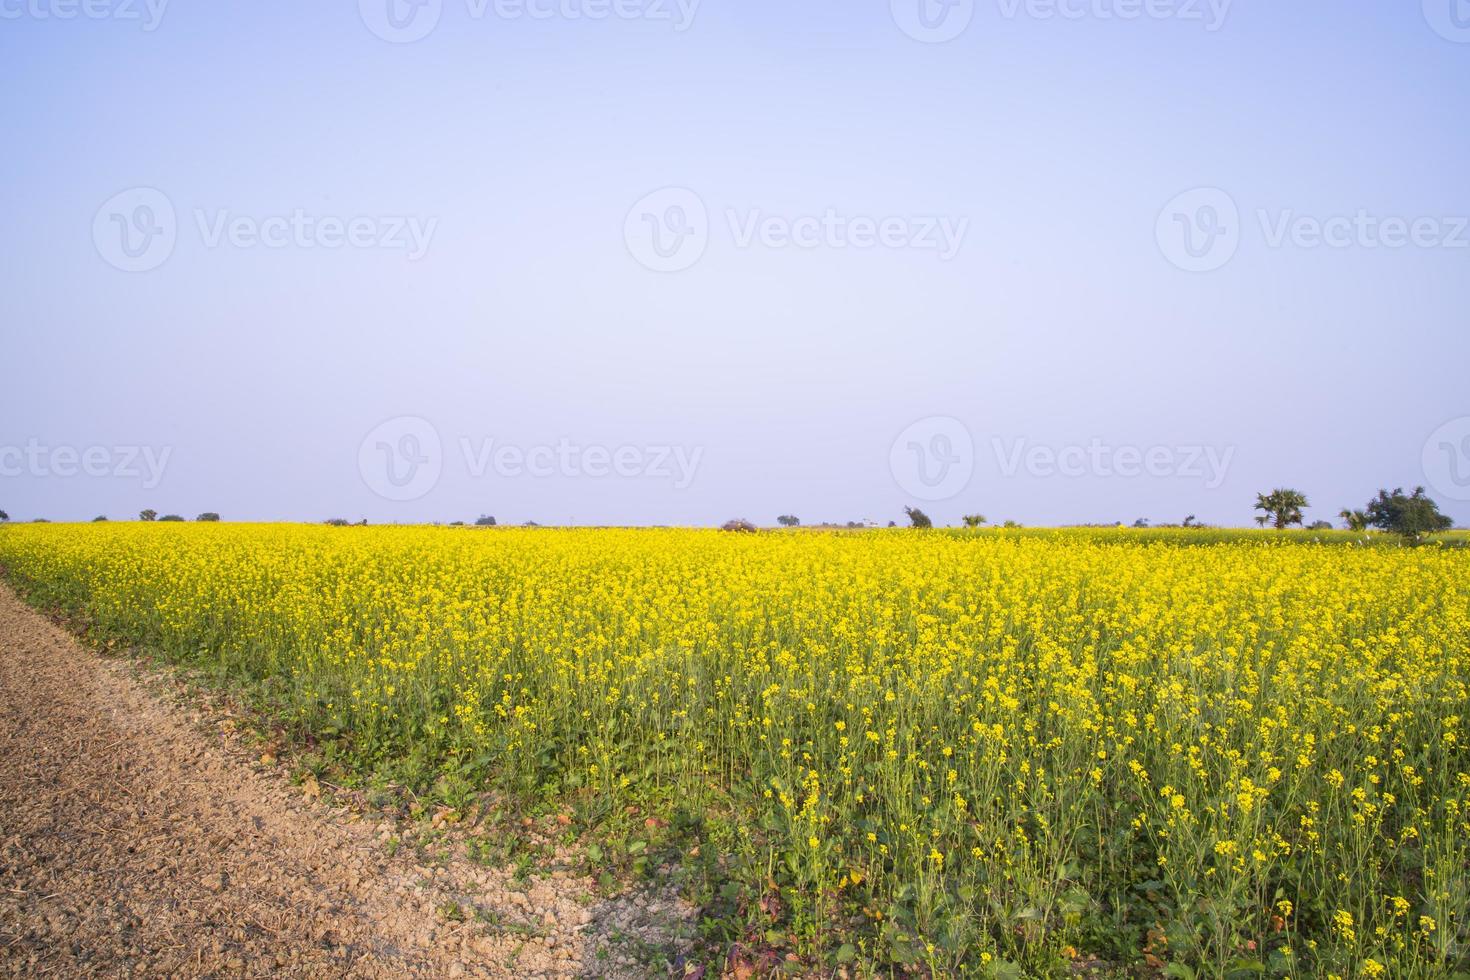 Rural dirt road through the rapeseed field with the blue sky background photo